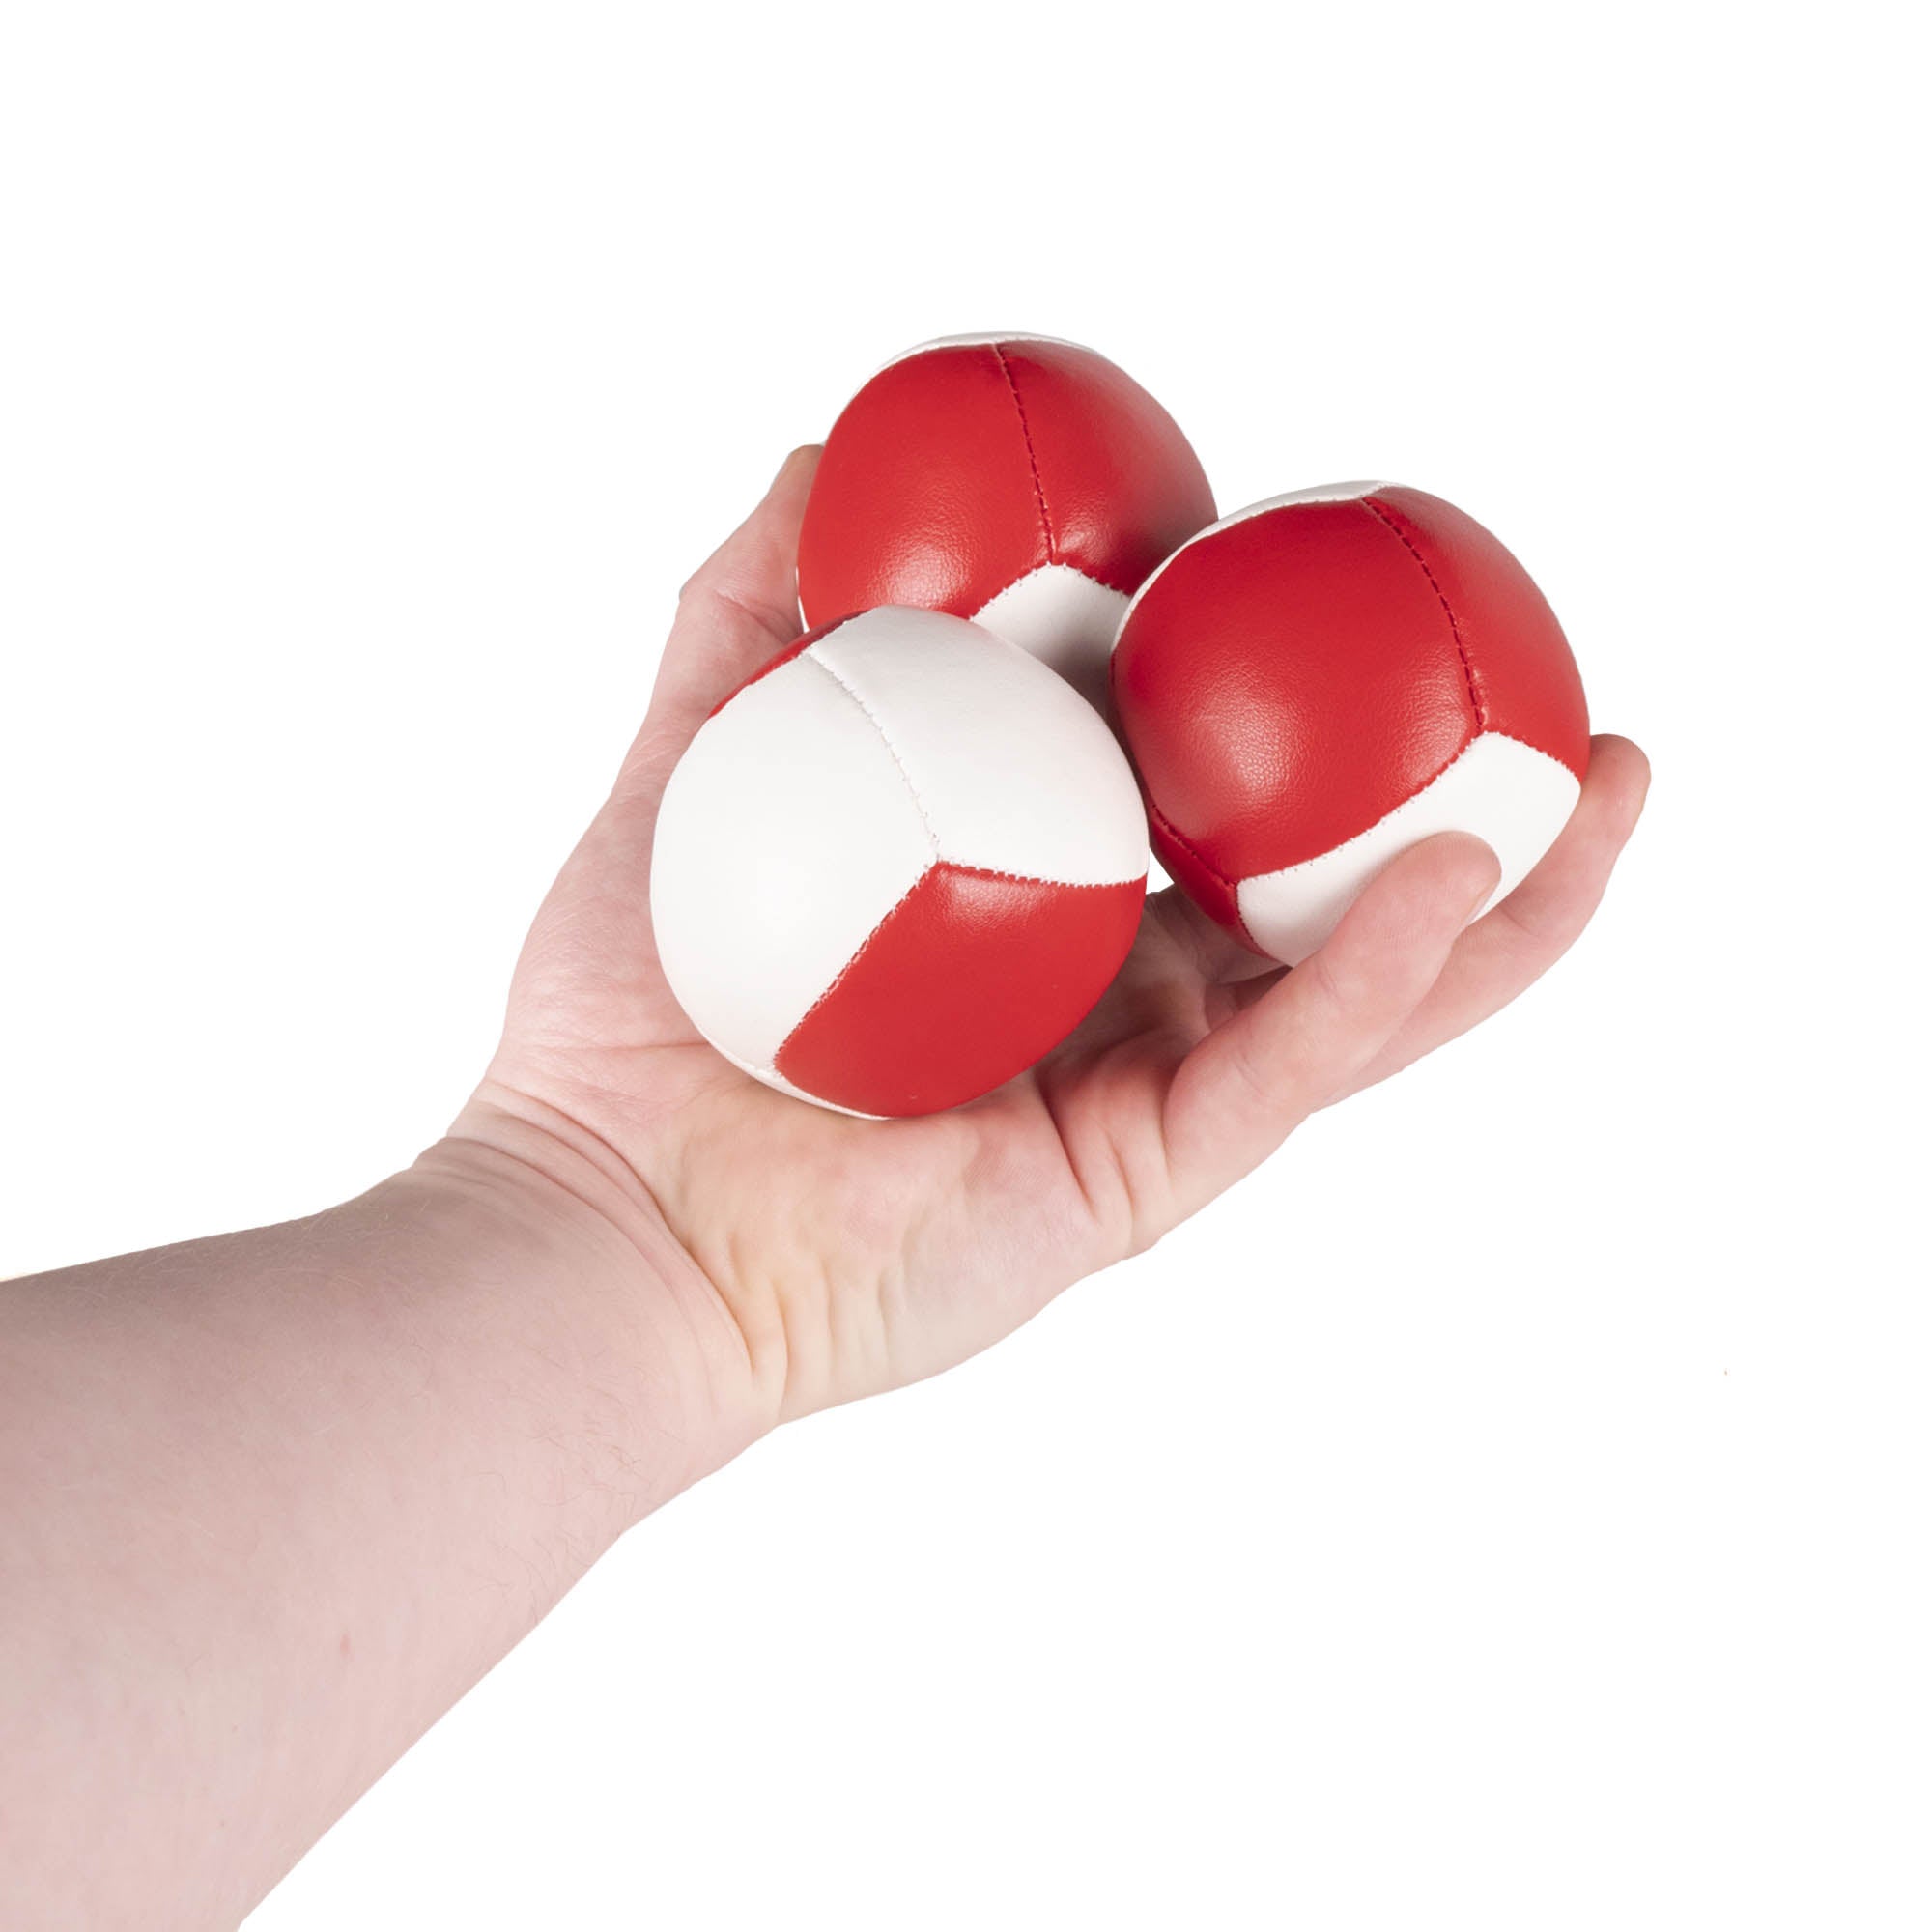 Firetoys three red/white 110g thud juggling balls in hand